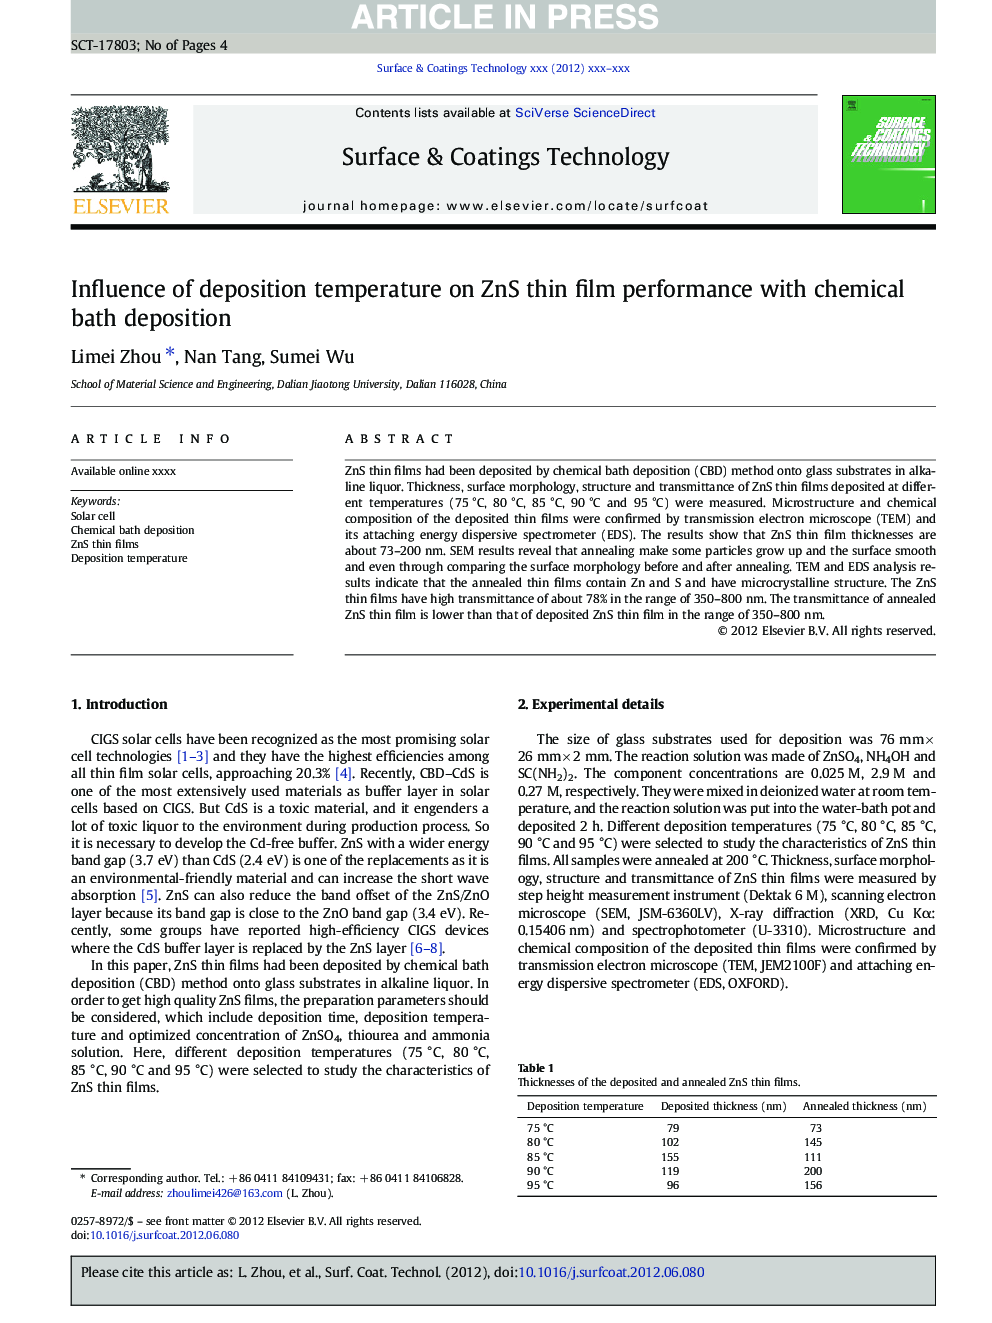 Influence of deposition temperature on ZnS thin film performance with chemical bath deposition